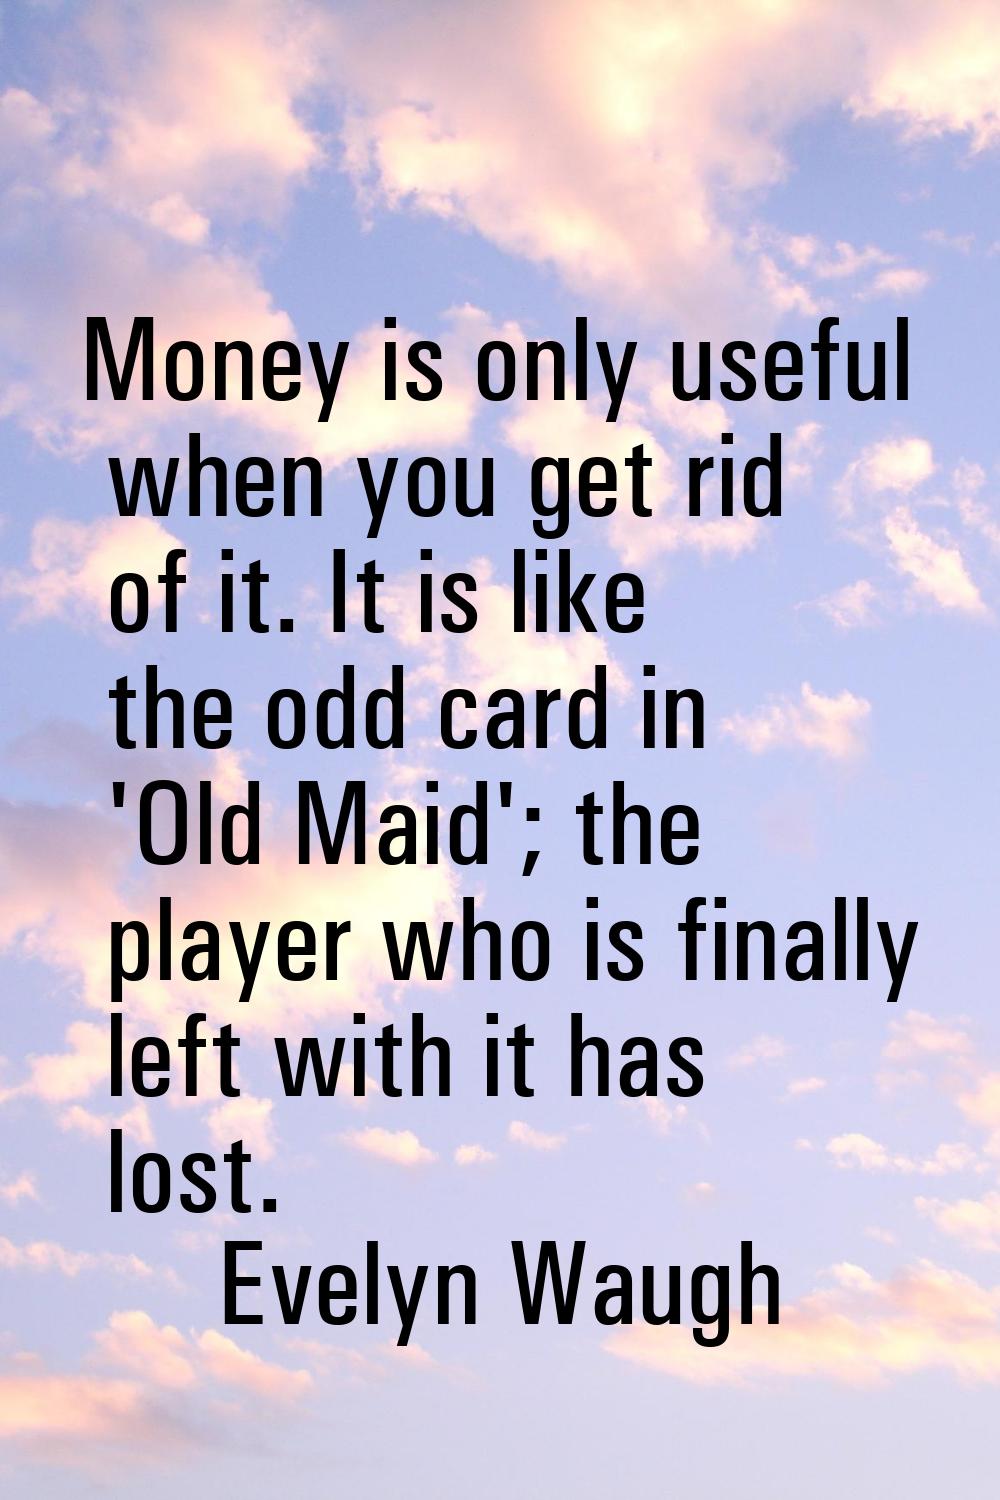 Money is only useful when you get rid of it. It is like the odd card in 'Old Maid'; the player who 